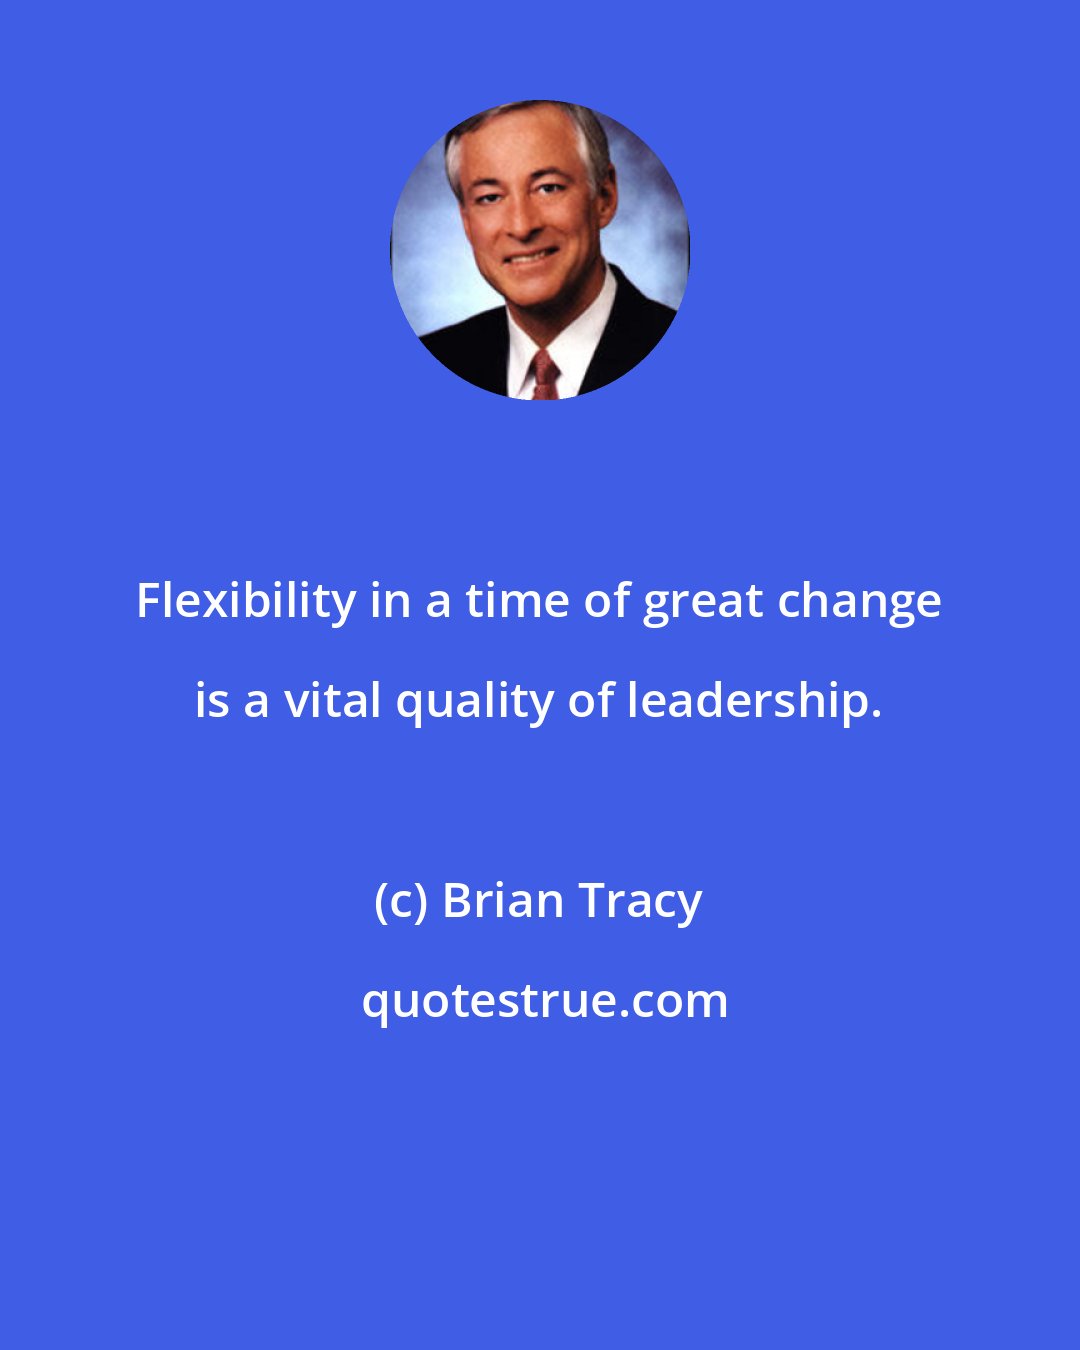 Brian Tracy: Flexibility in a time of great change is a vital quality of leadership.